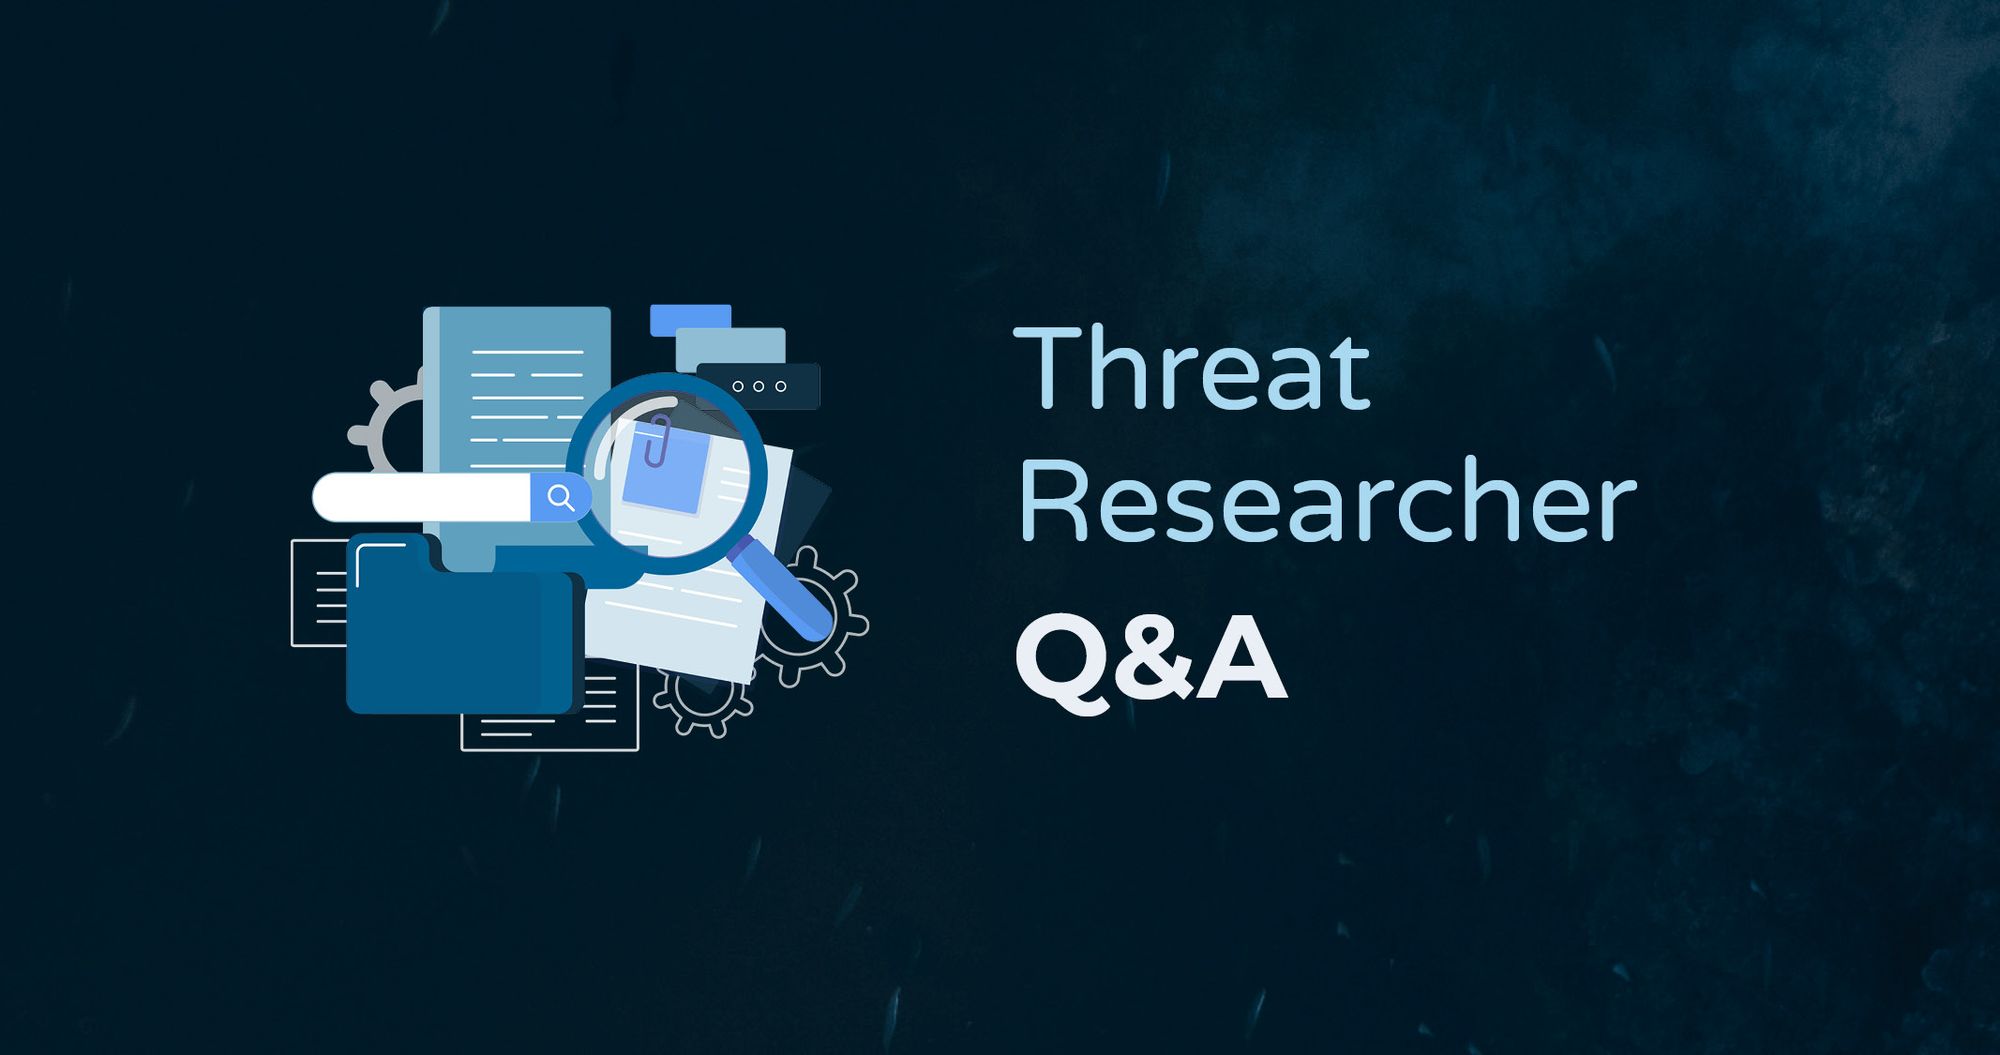 Behind the Scenes: Hiring a Threat Researcher